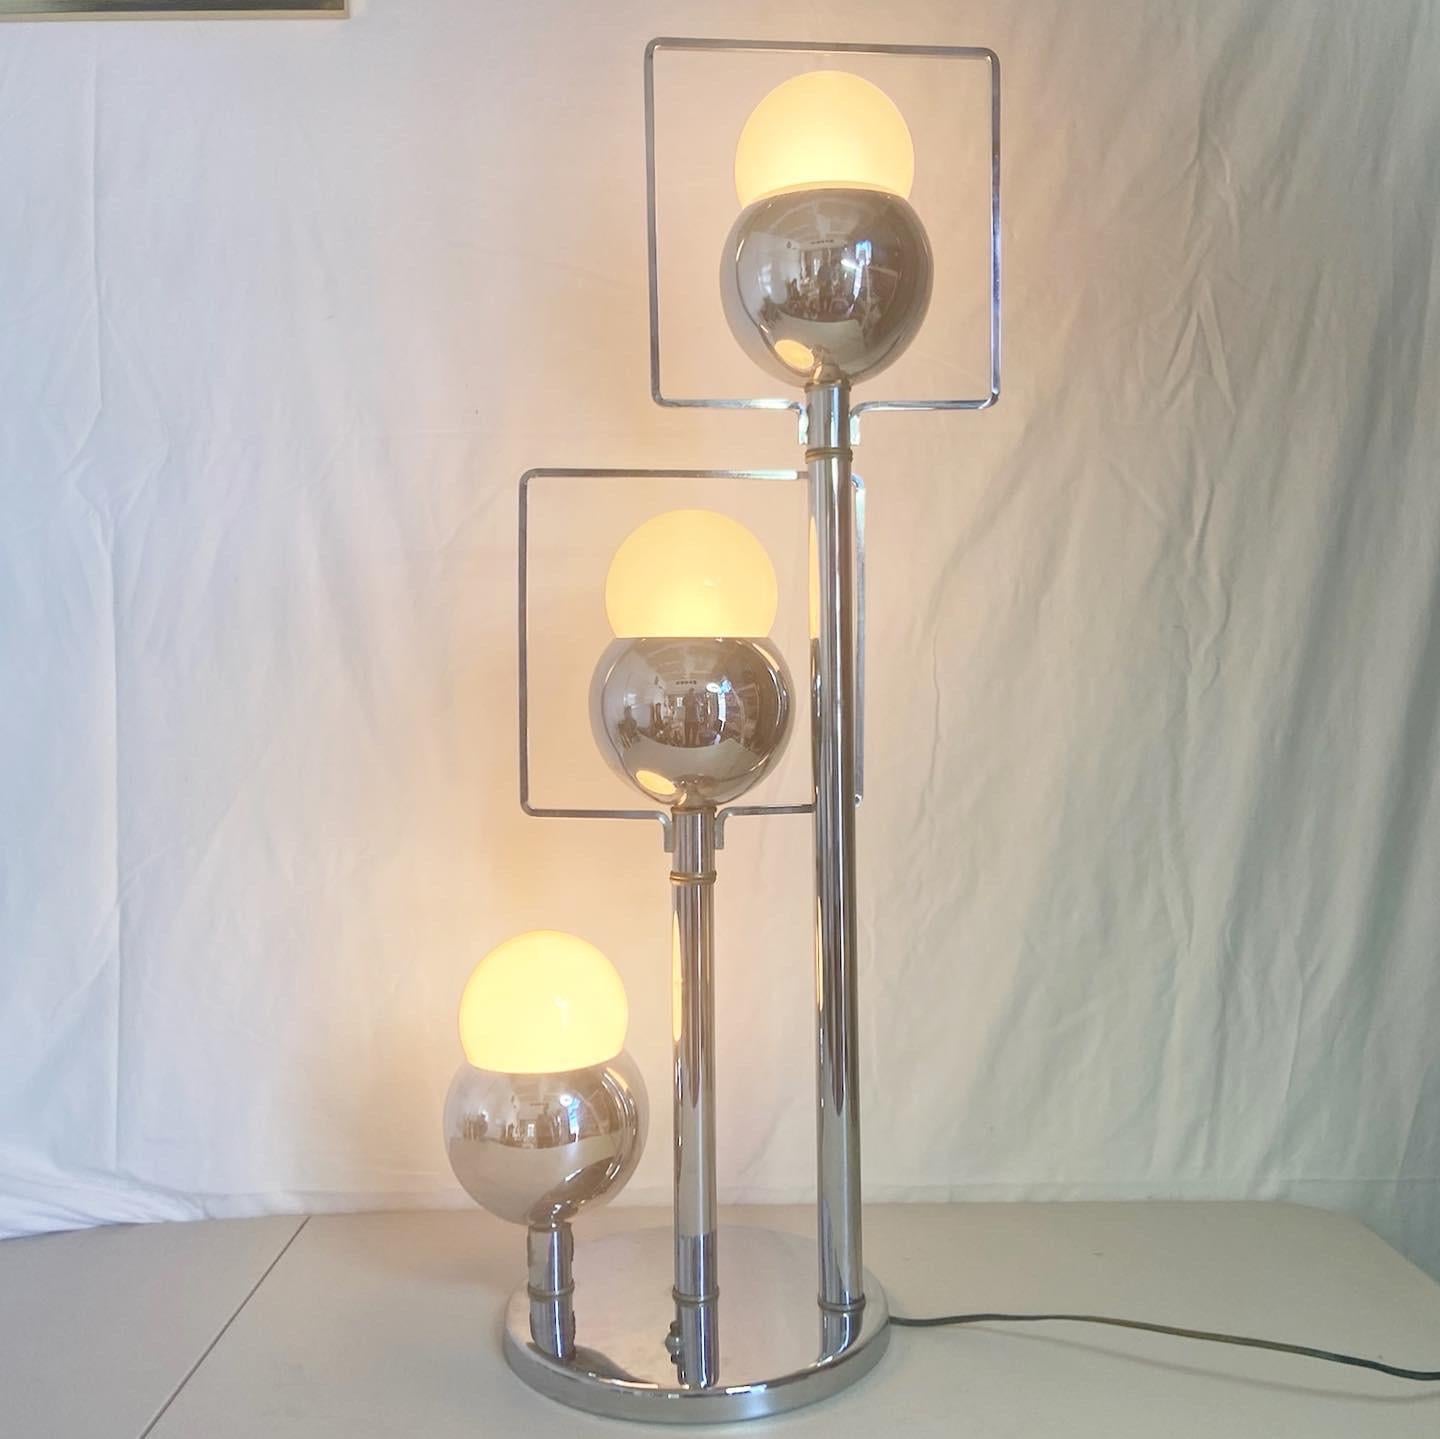 Amazing pair of space age mid century modern chrome table lamps. Each lamp features 3 accenting heads each with a square framing the bulb. Light bulbs are not included. less

